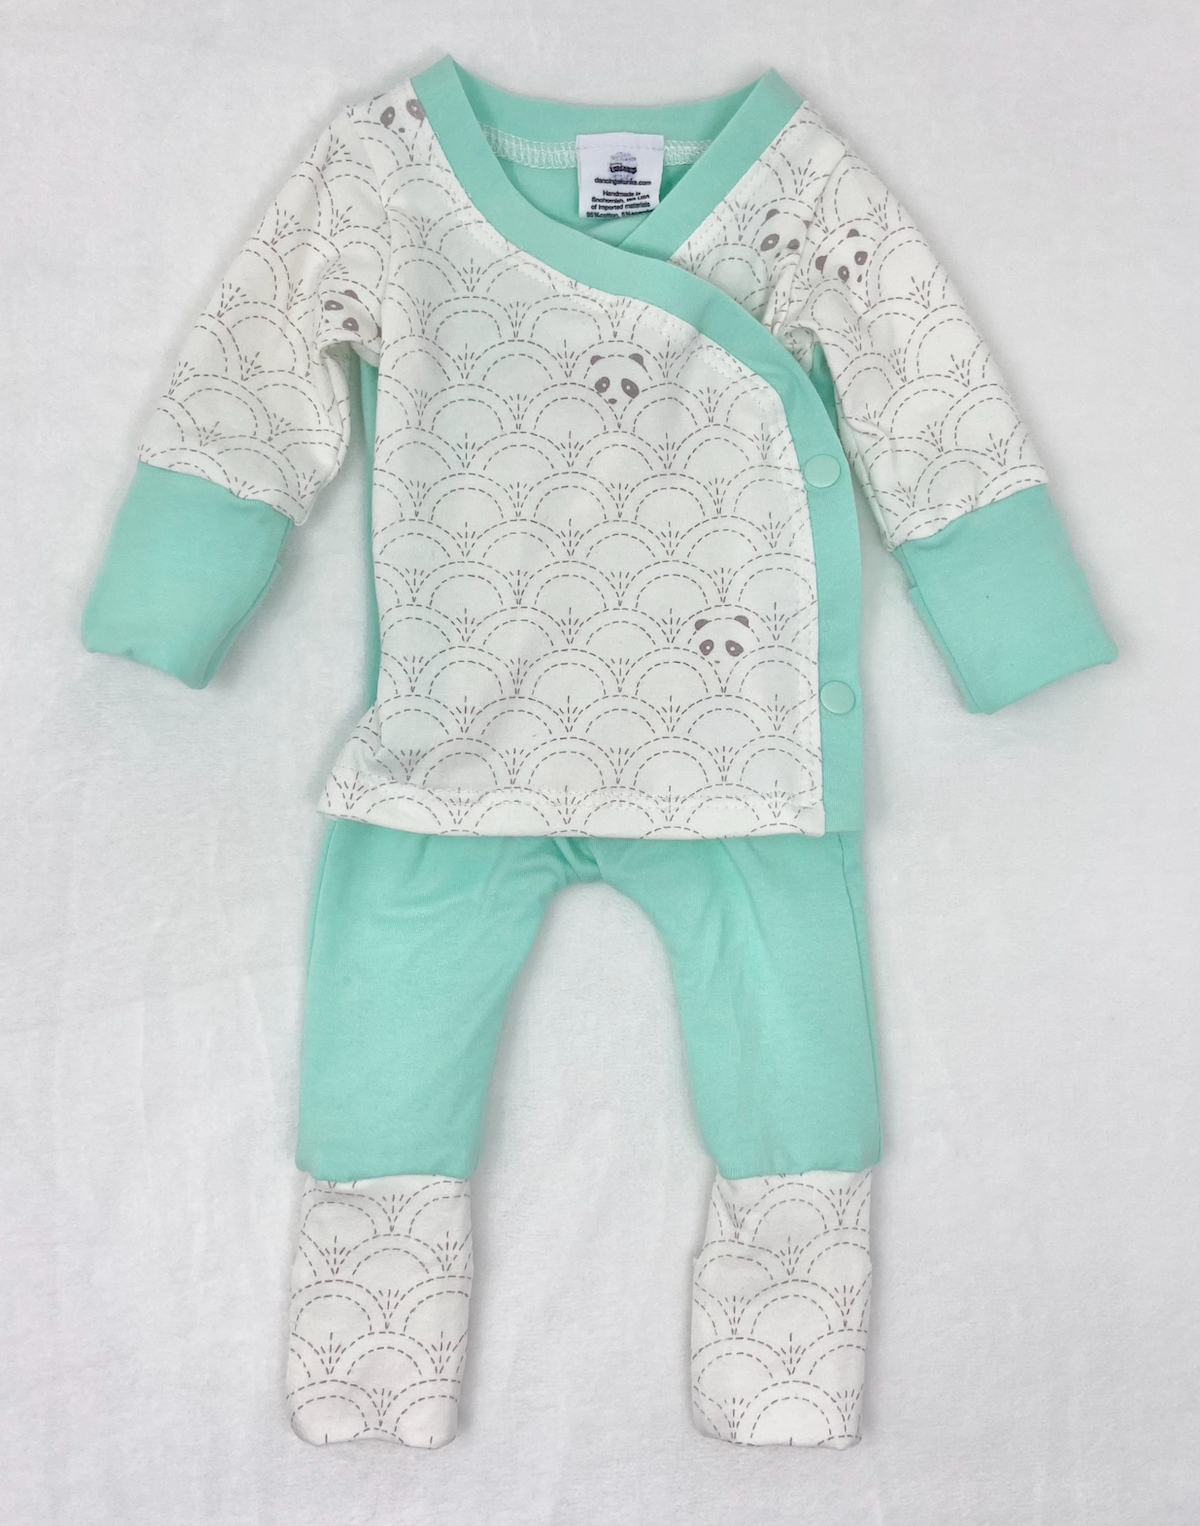 Newborn clothes, Newborn romper, baby clothes, baby panda outfit, gender neutral baby outfit, going home outfit, NICU clothes, NICU outfit, skin to skin with baby, grow with me outfit for baby, baby girl clothes, preemie clothes, preemie outfit, Kangaroo care outfit